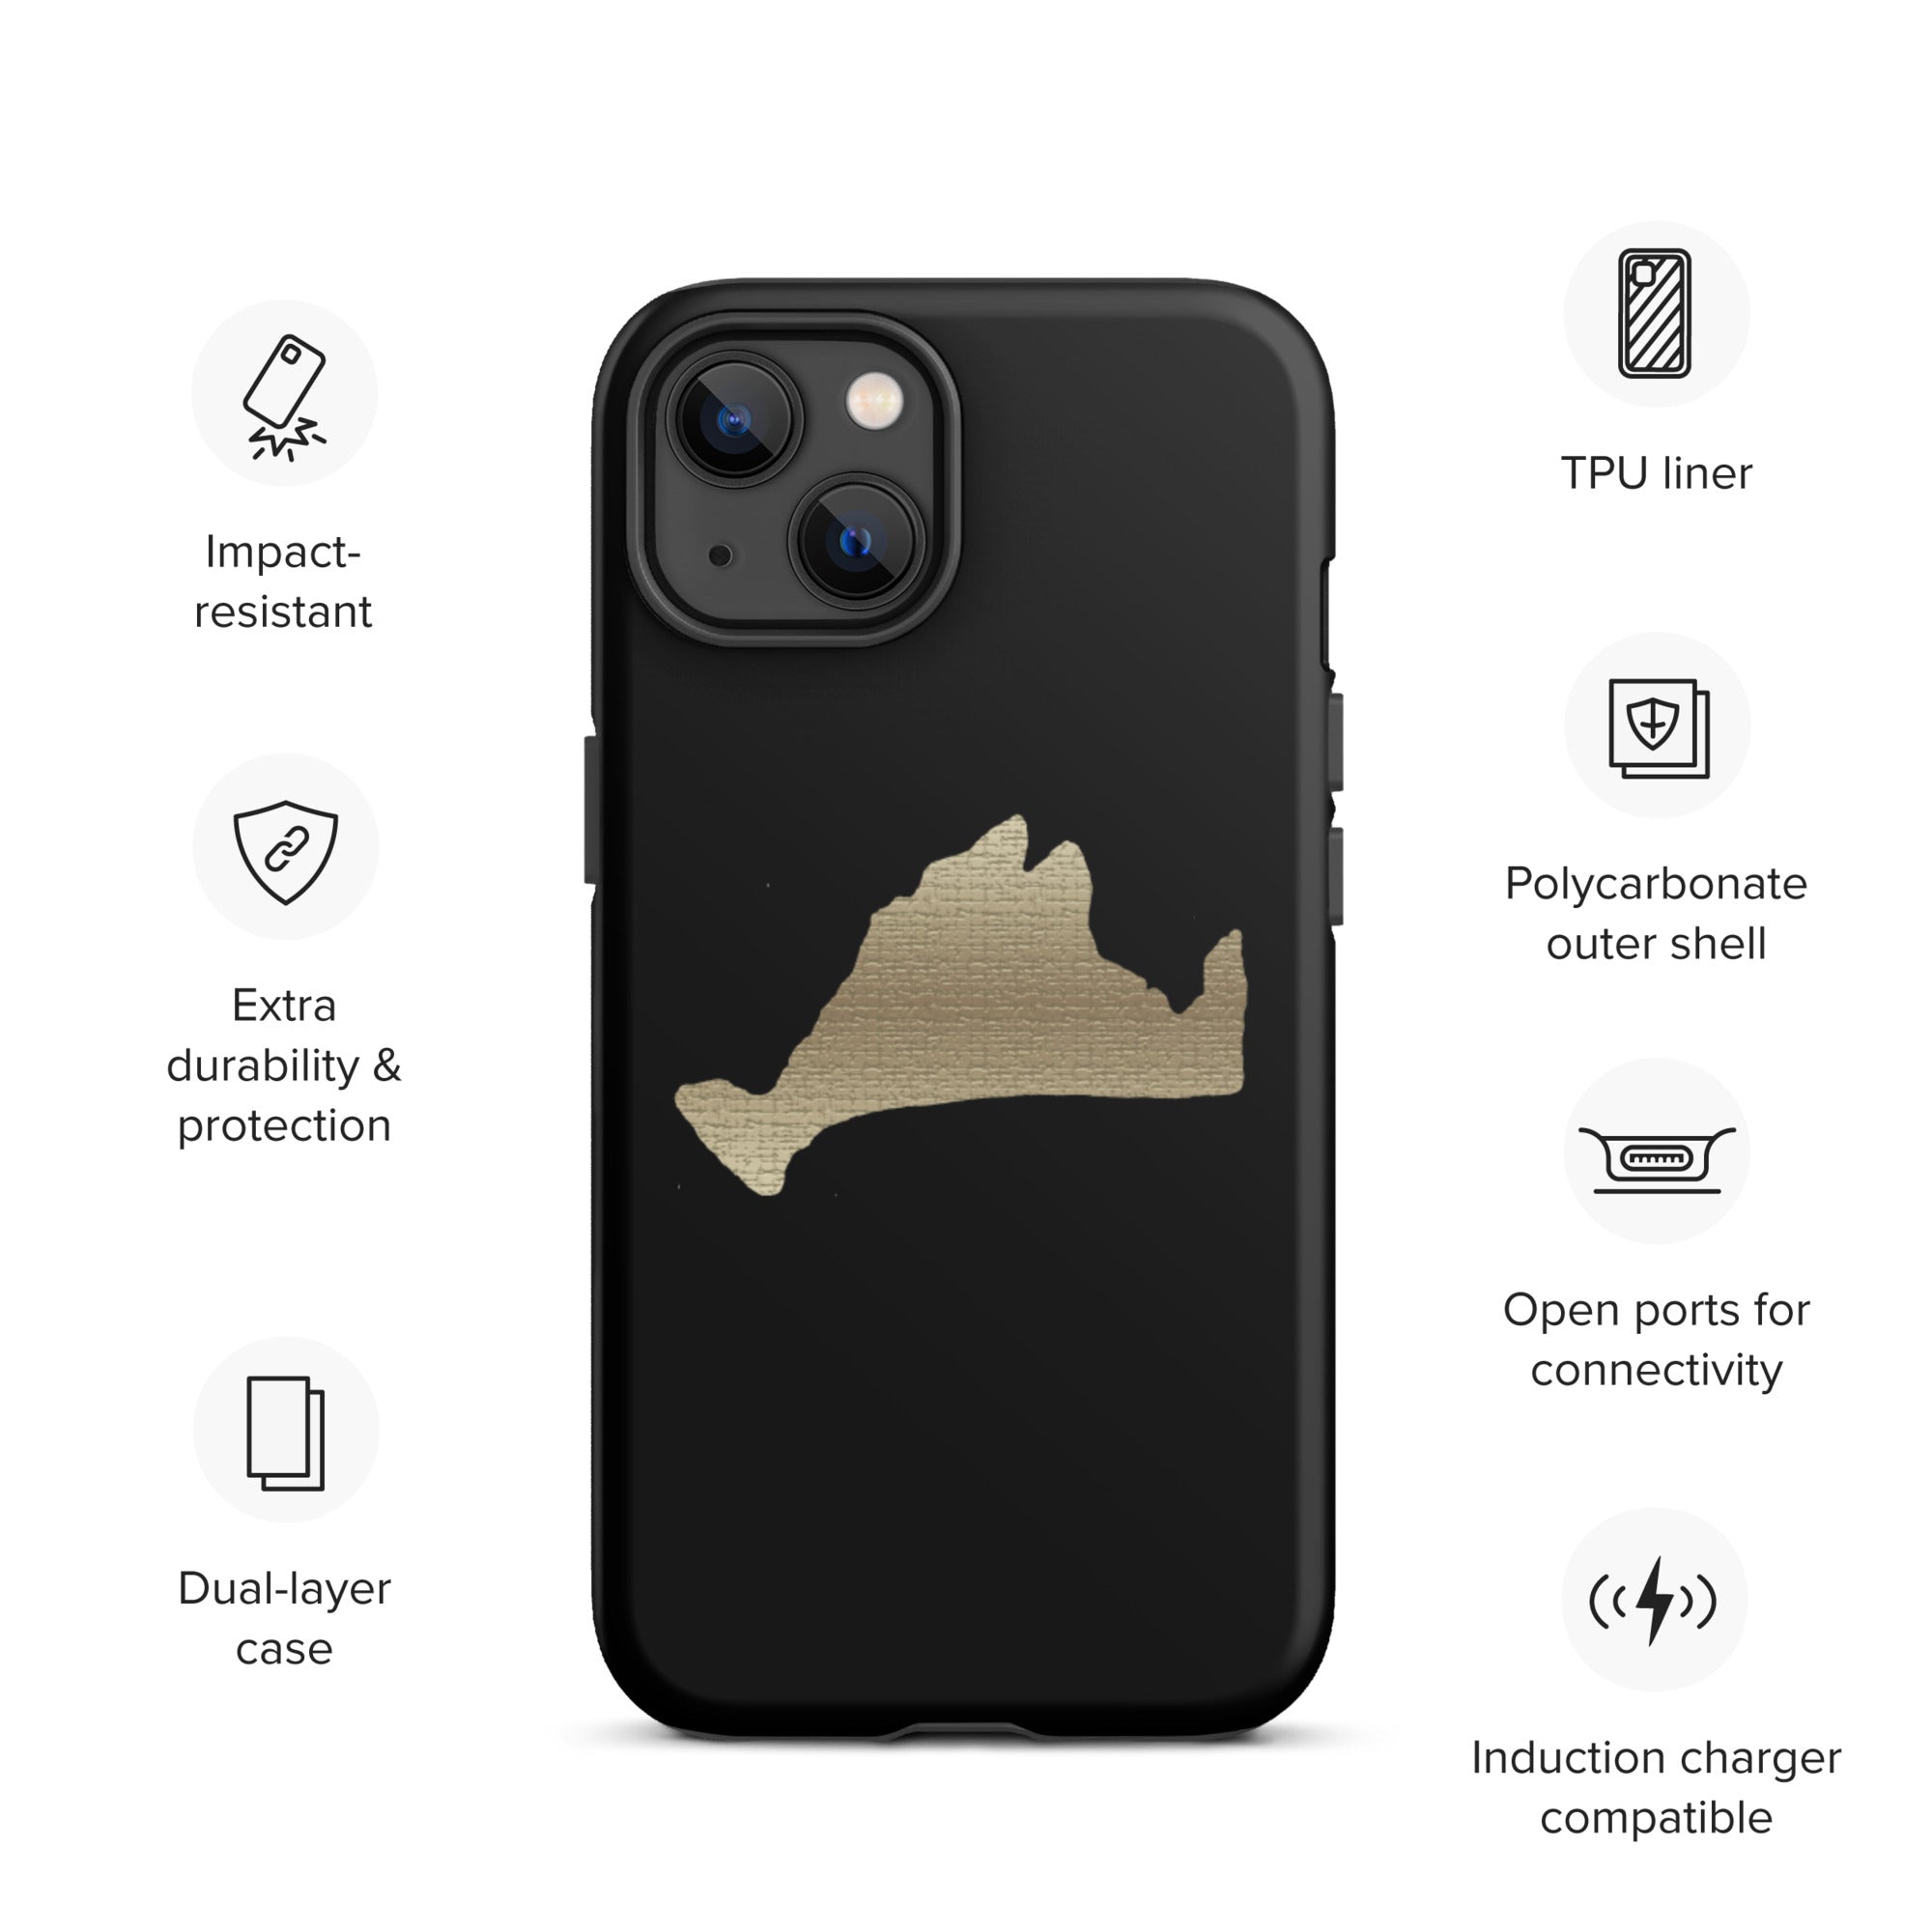 Black and Gold Tough iPhone Case